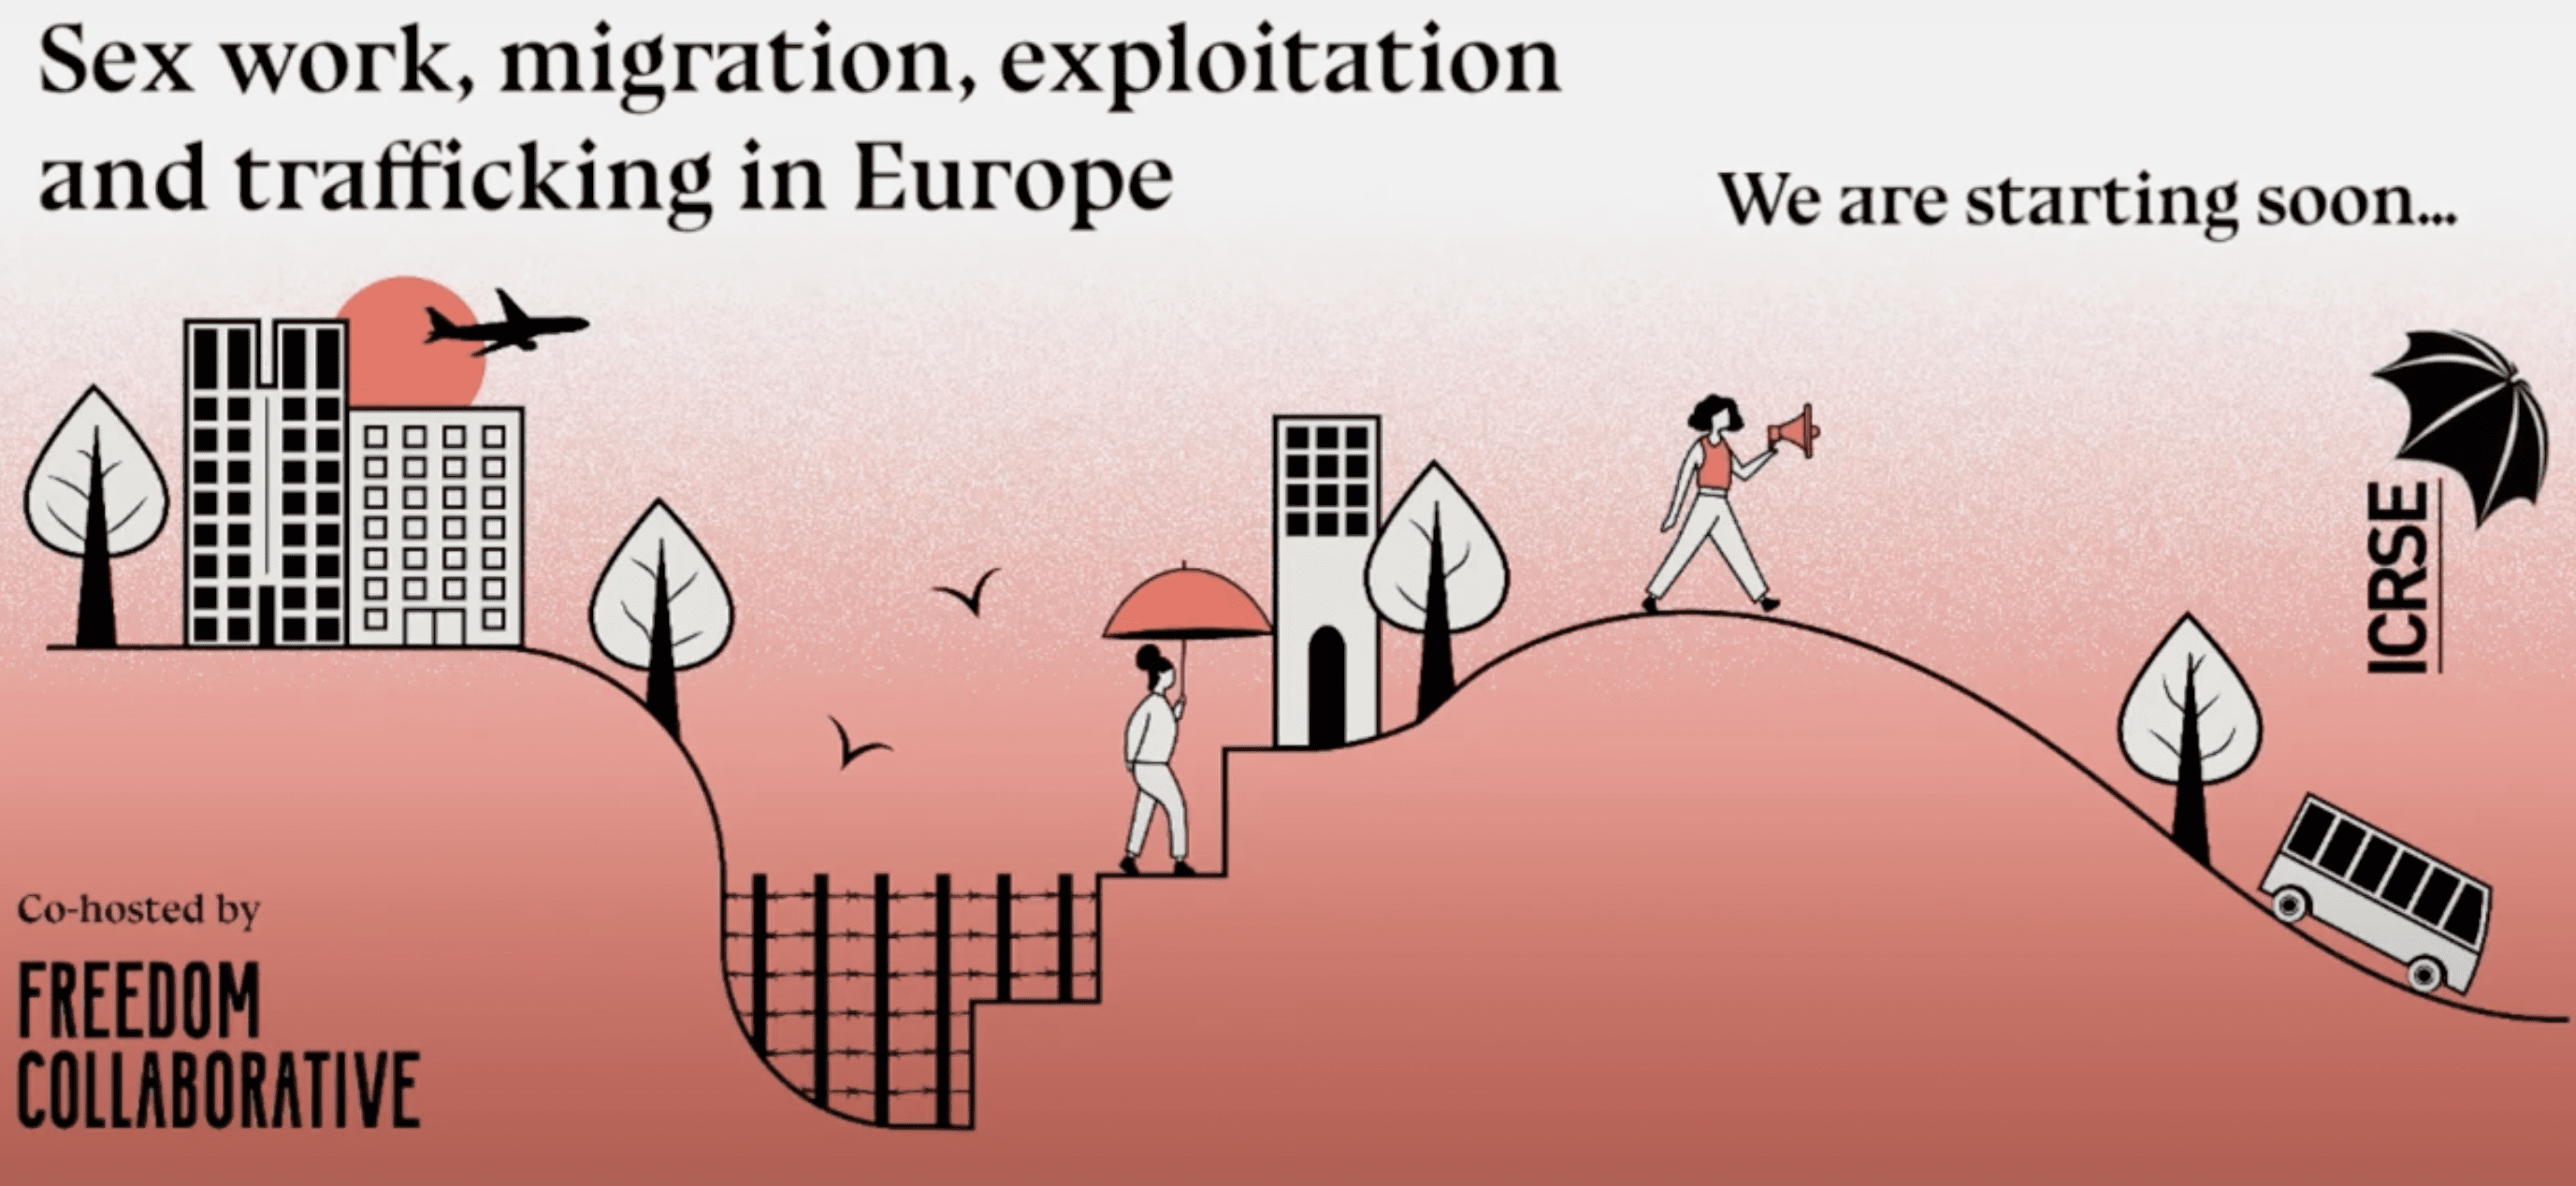 Sex work, migration, exploitation and trafficking in Europe